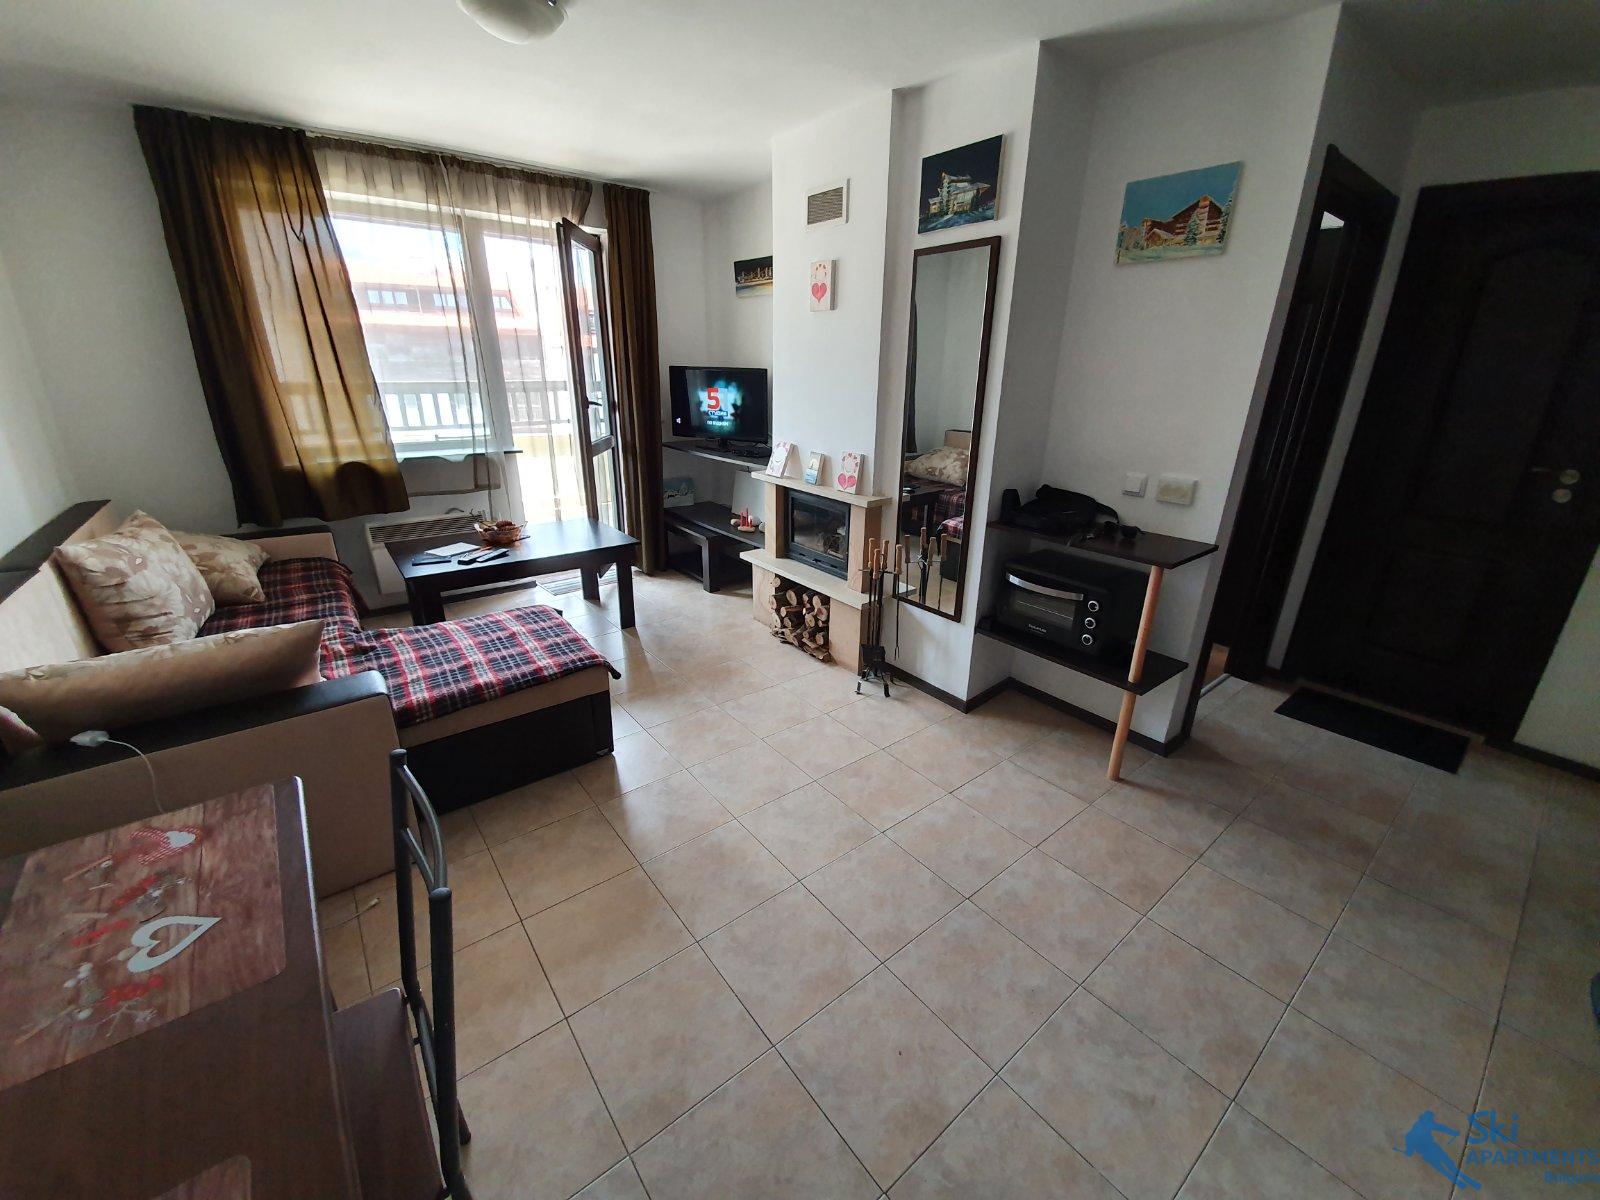 one bedroom apartment with fireplace in maria antoaneta